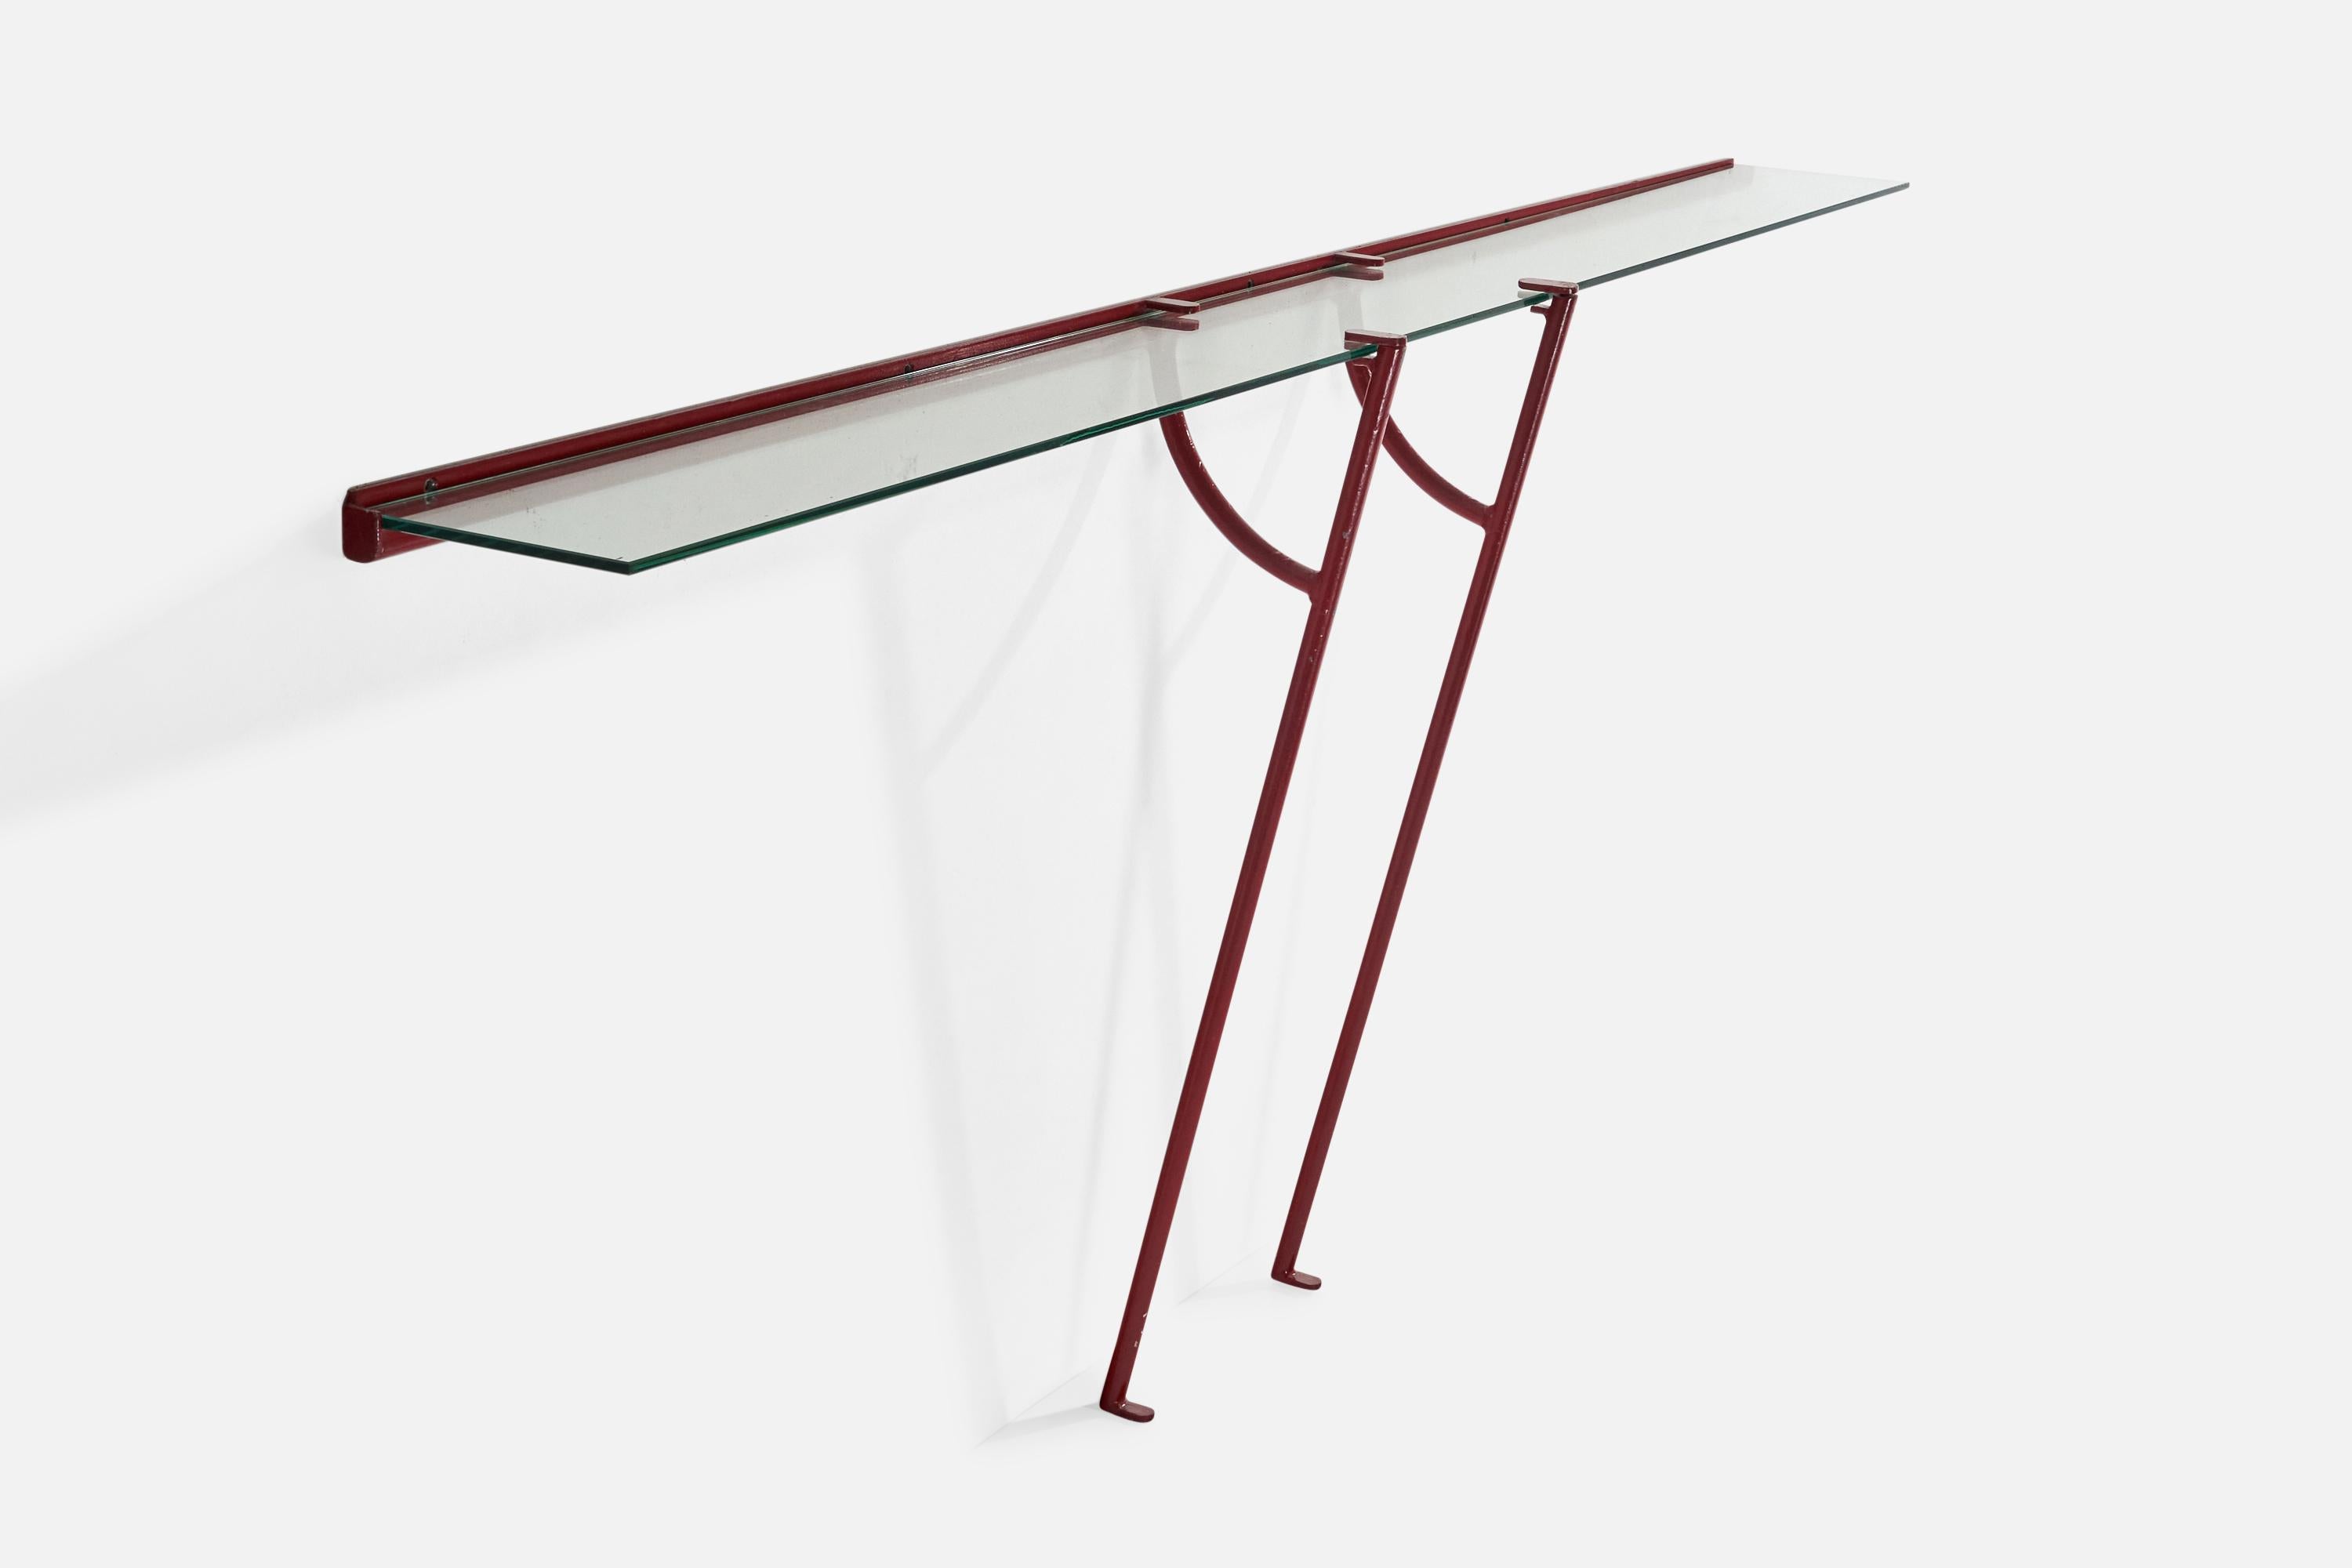 A red-lacquered metal and glass wall mounted console table designed and produced in Italy, c. 1960s.